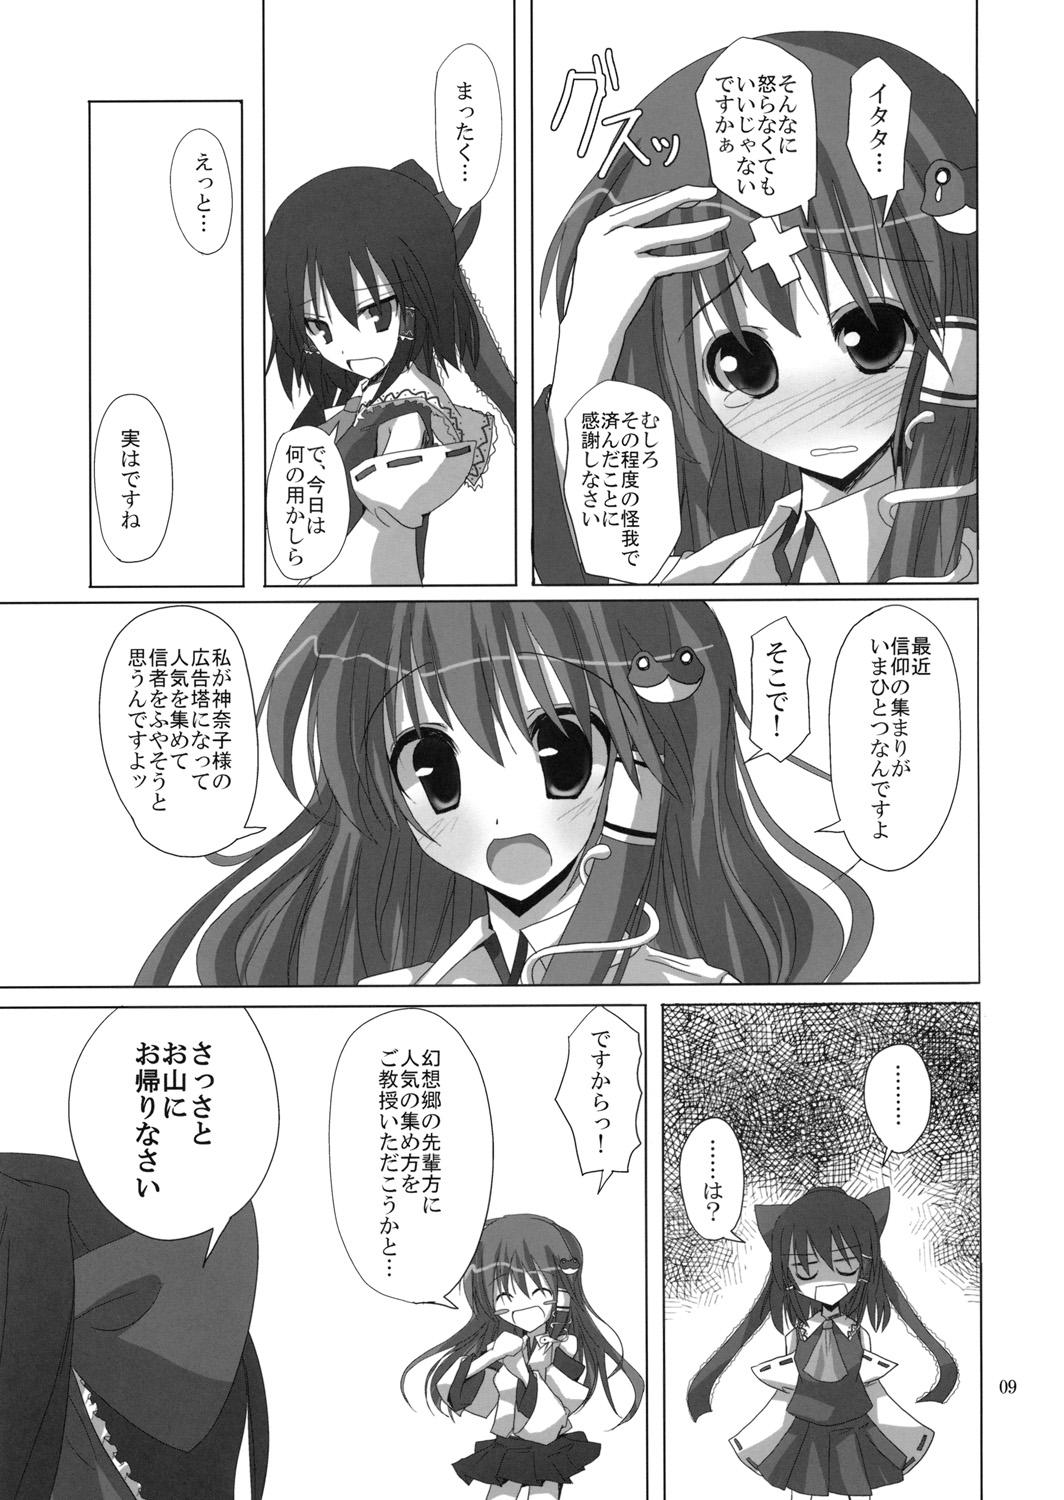 Facefuck Gensou Kitan 11 - Touhou project Gays - Page 8